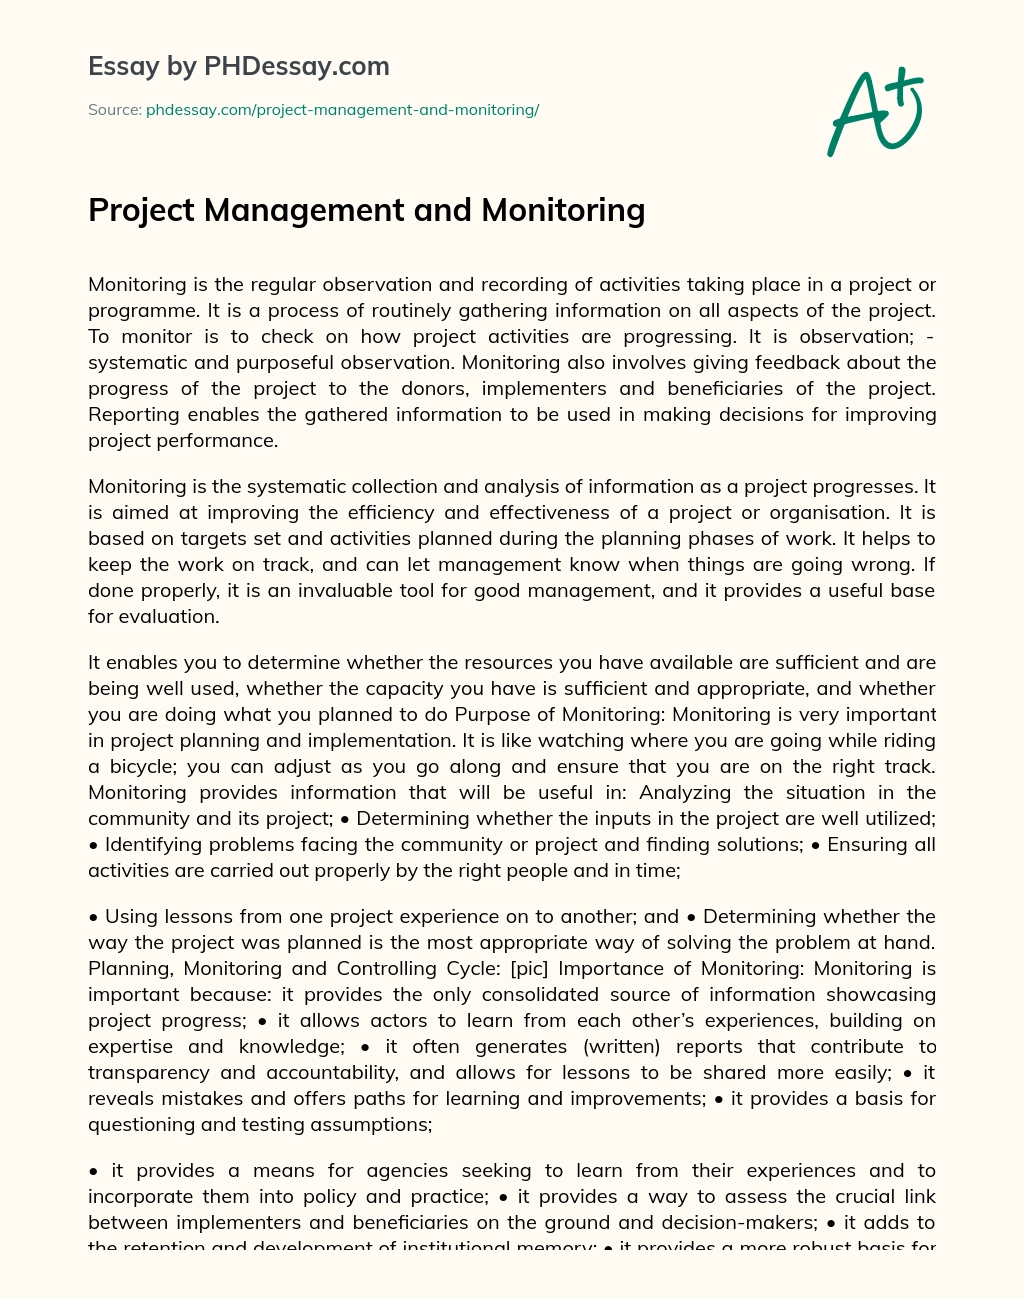 Project Management and Monitoring essay